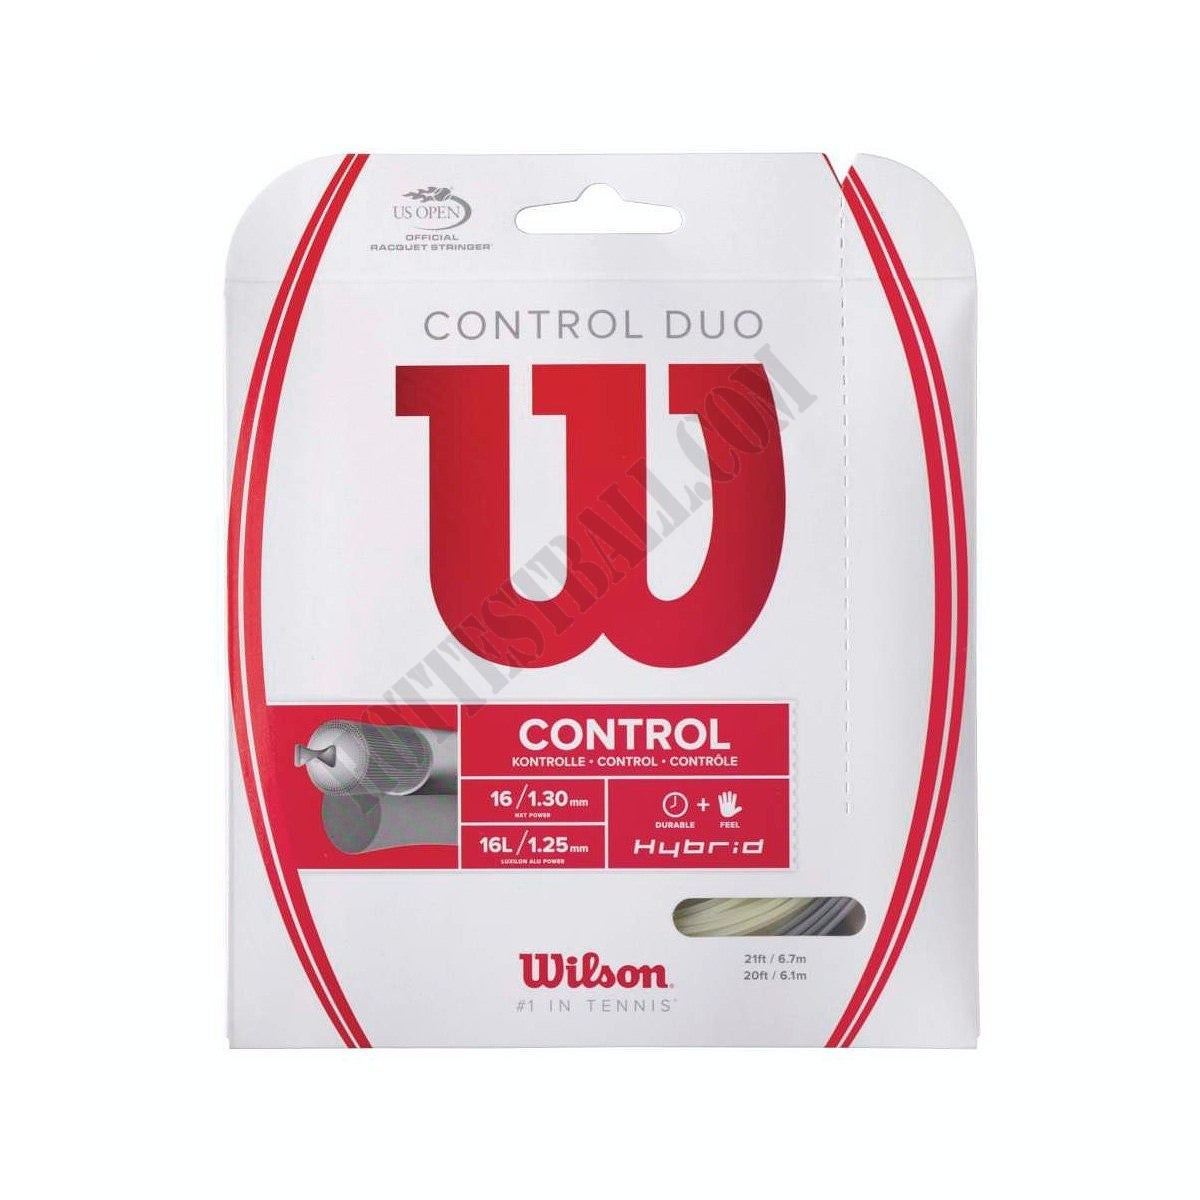 Duo Control Hybrid Tennis String Set - Natural - Wilson Discount Store - -0